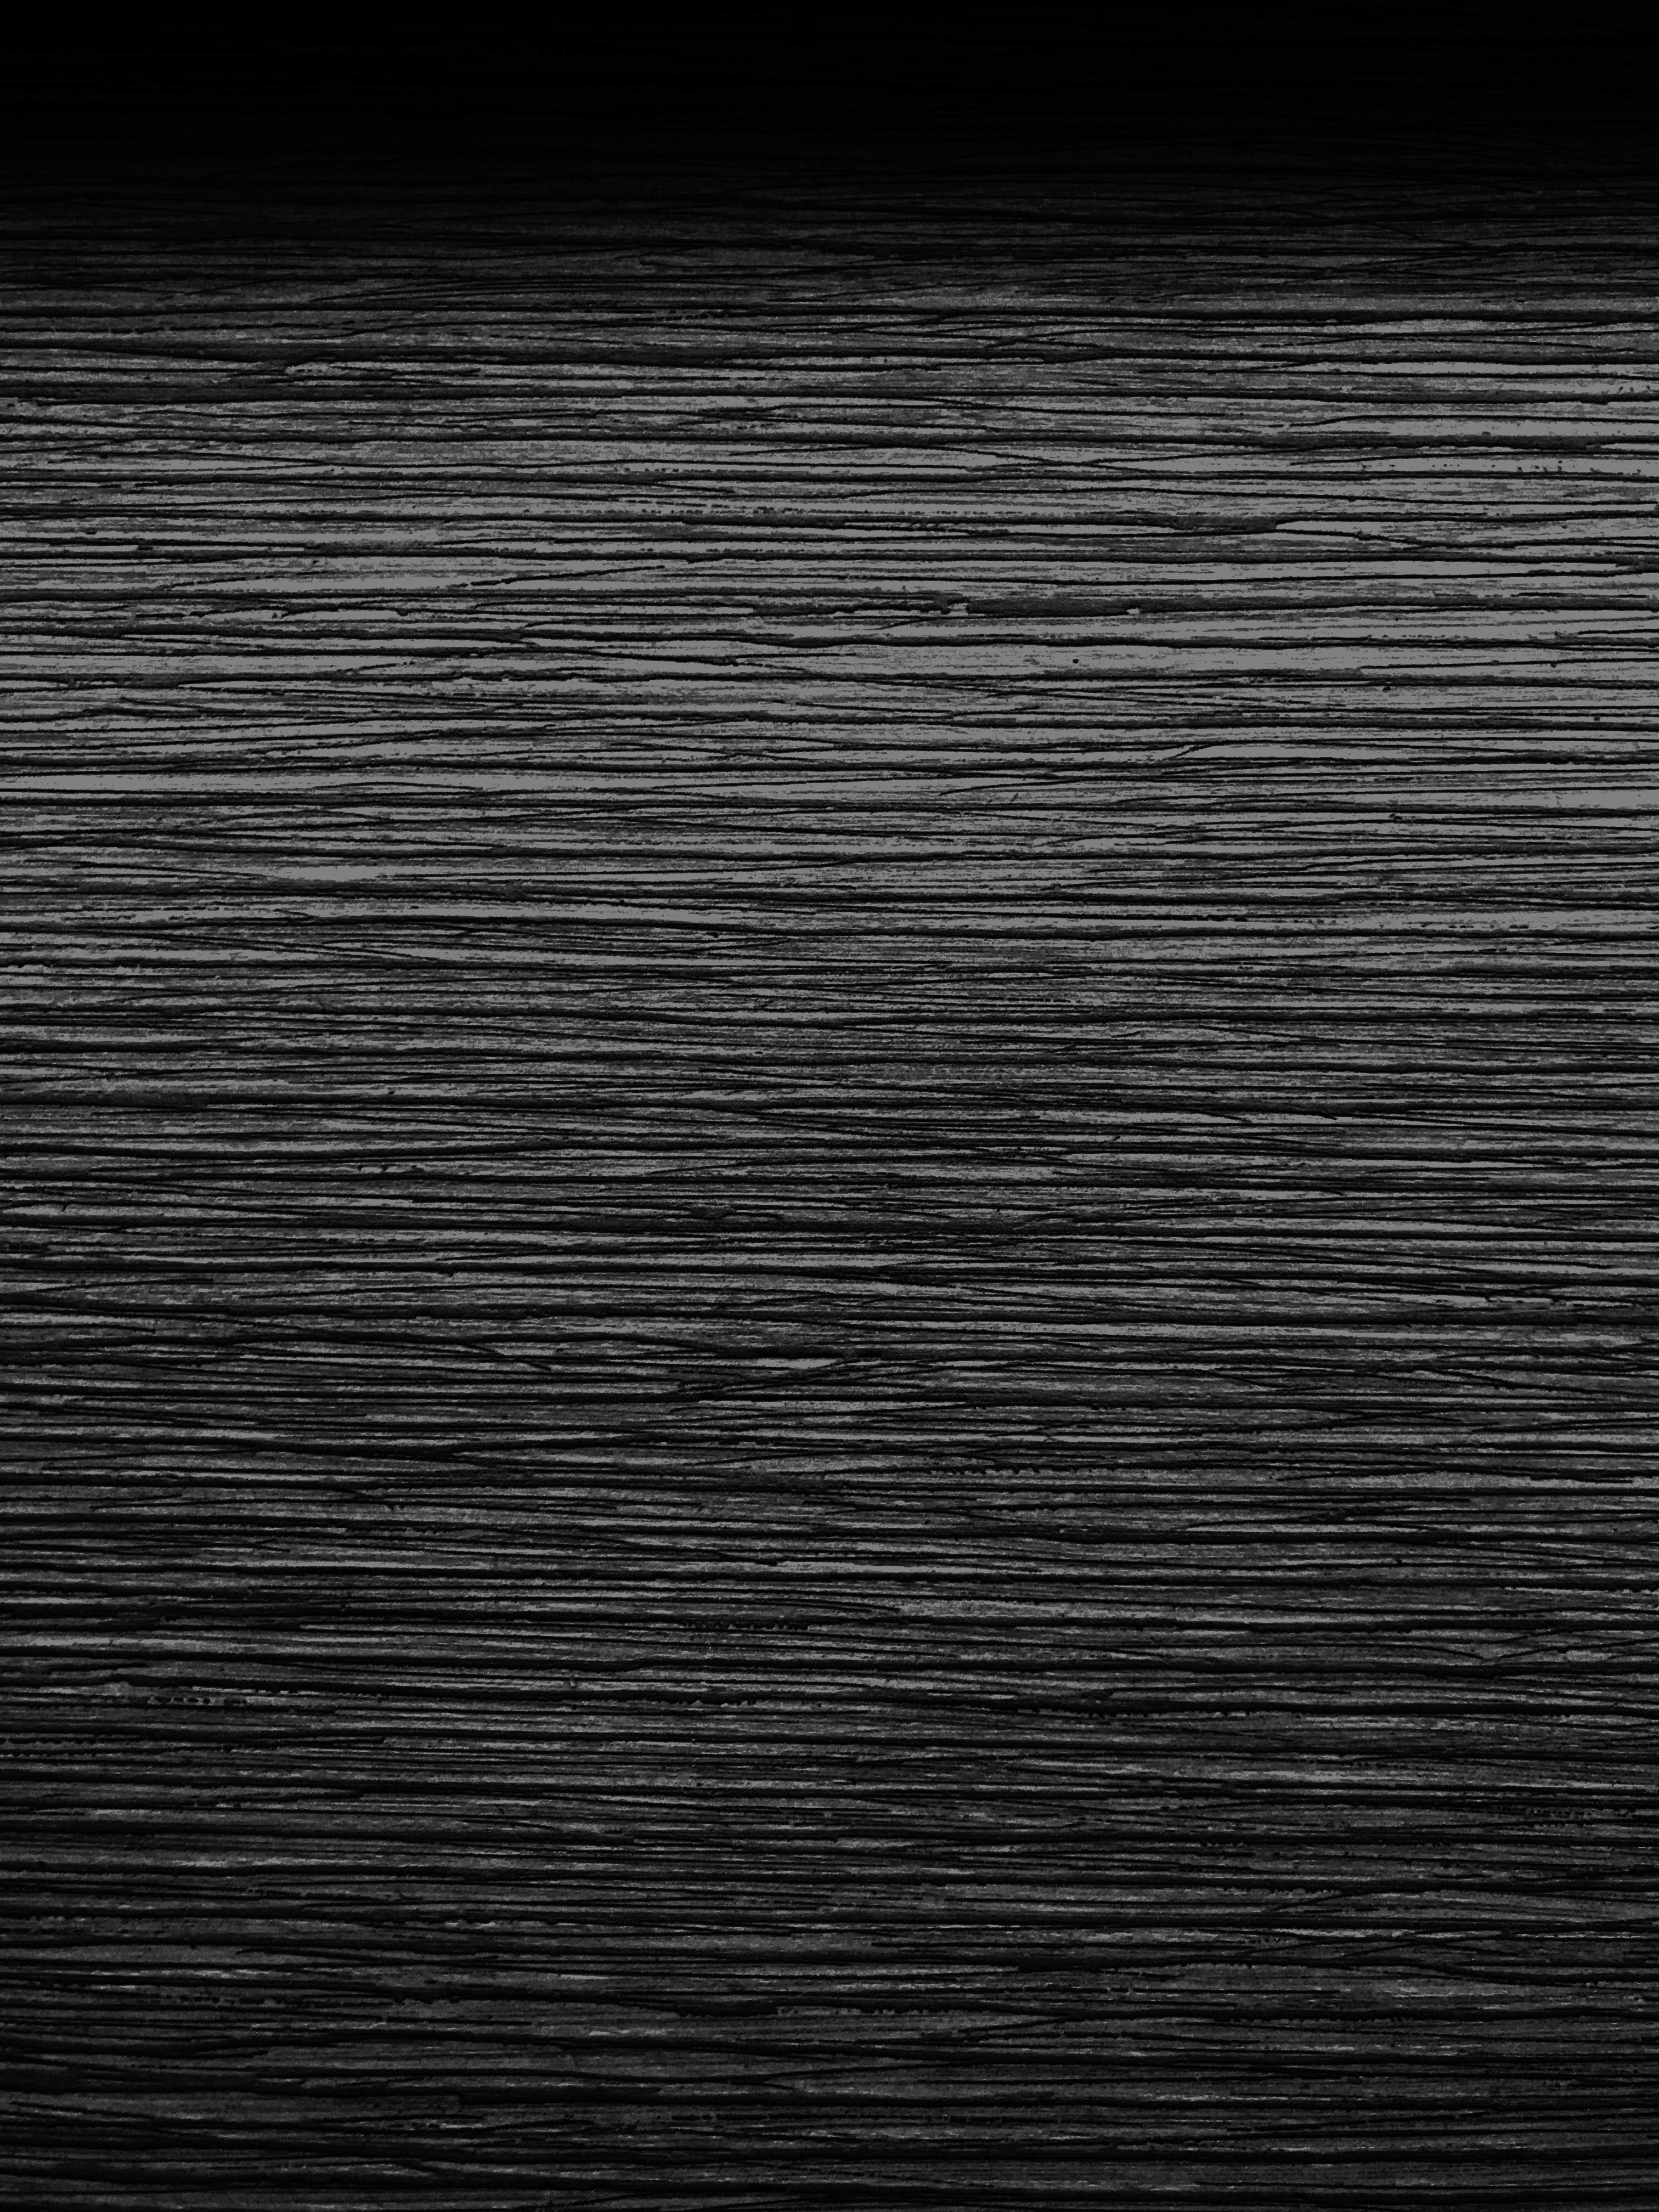 wooden, textures, black, wood, texture, surface, rough, board, rugged